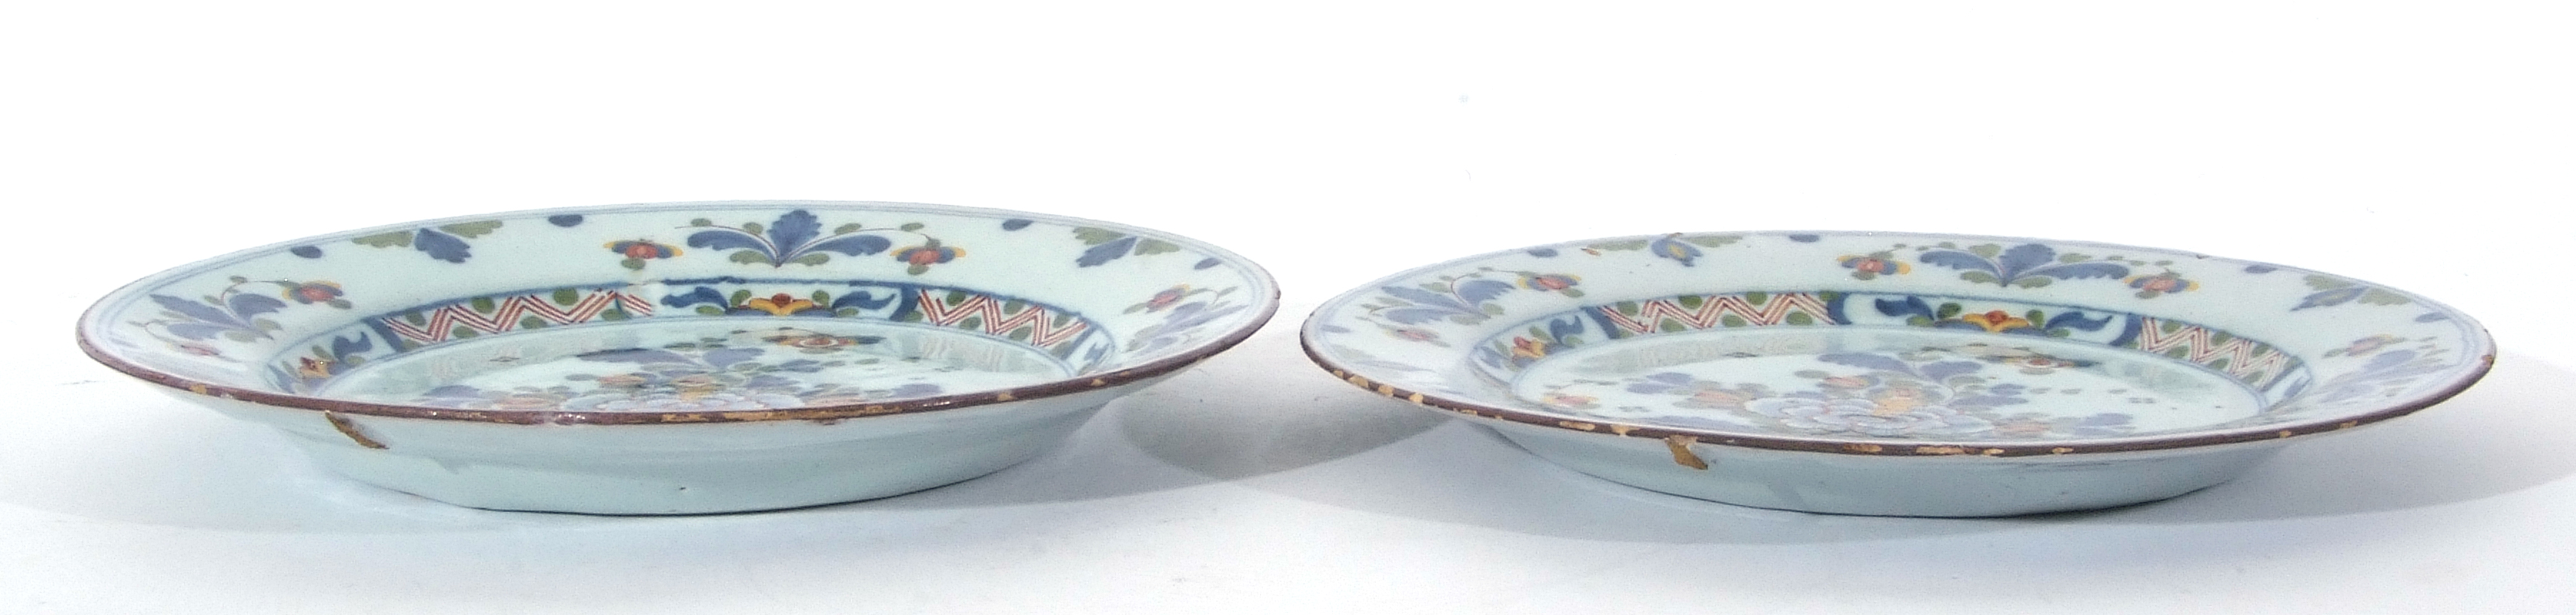 Pair of mid-18th century English Delft plates with polychrome design of flowers, probably Lambeth, - Image 2 of 3